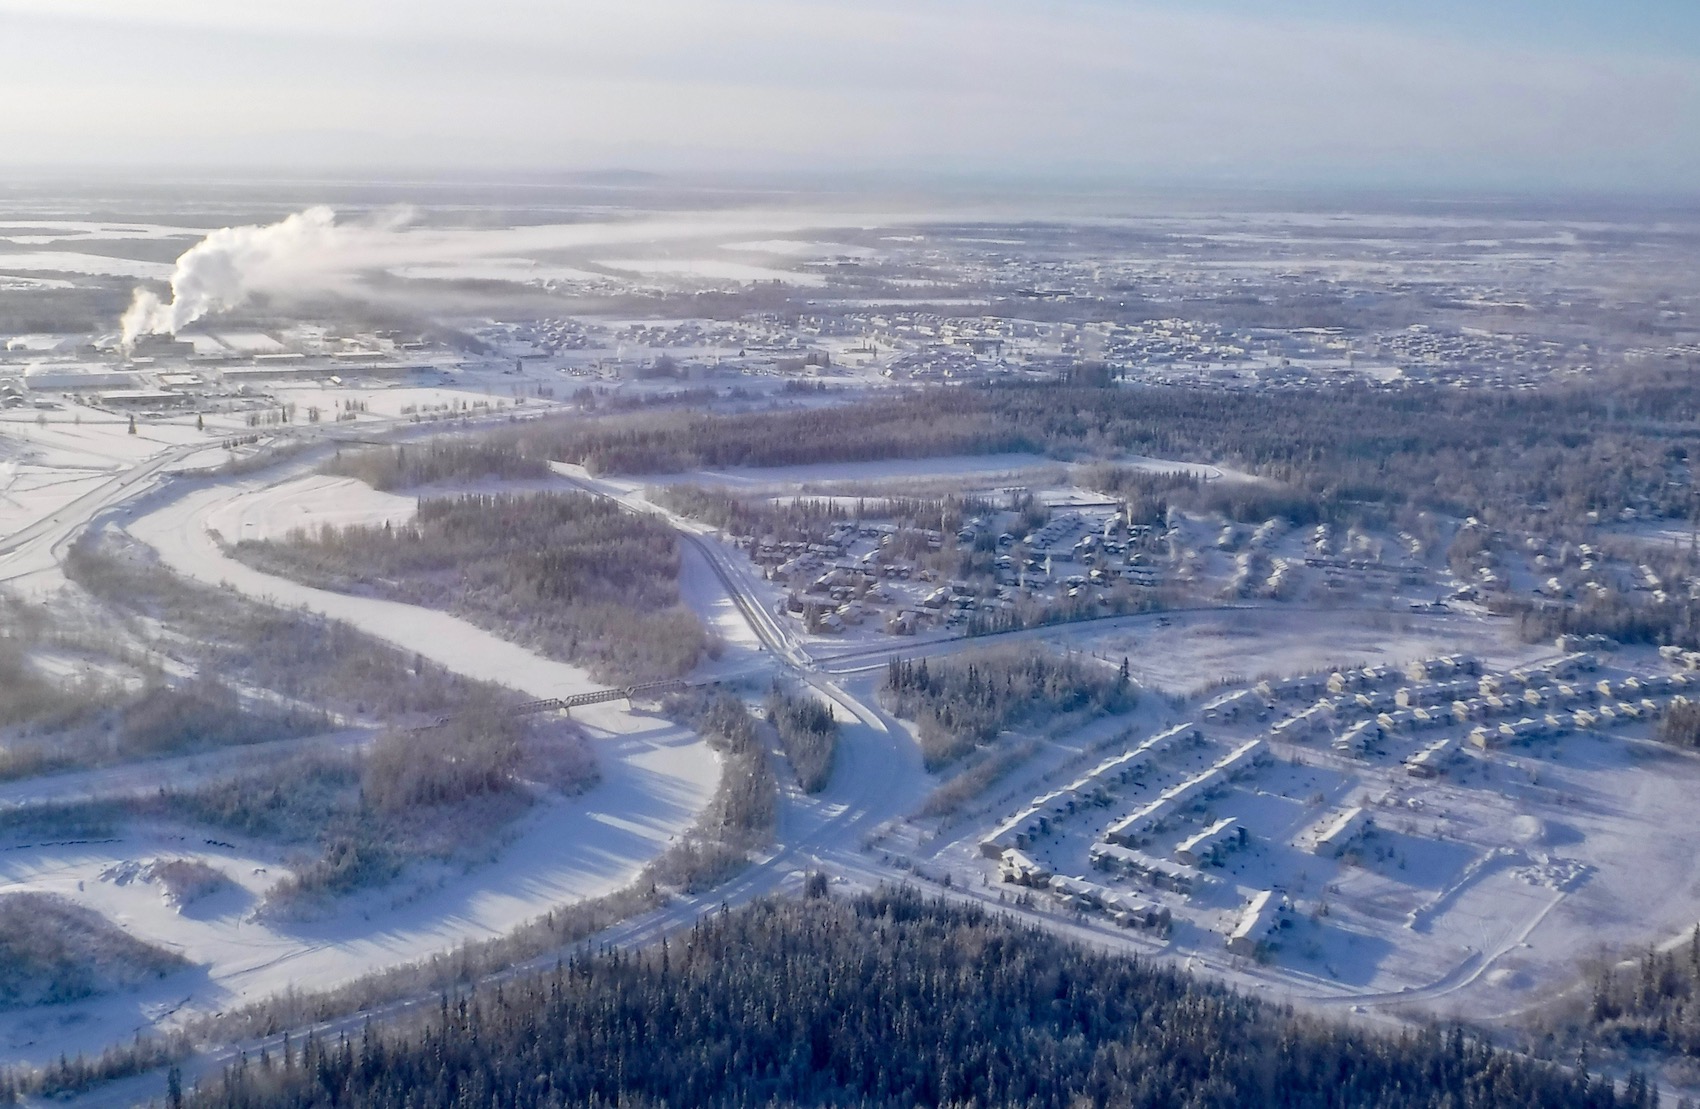 Sunlight touches a snowy city in this aerial view.